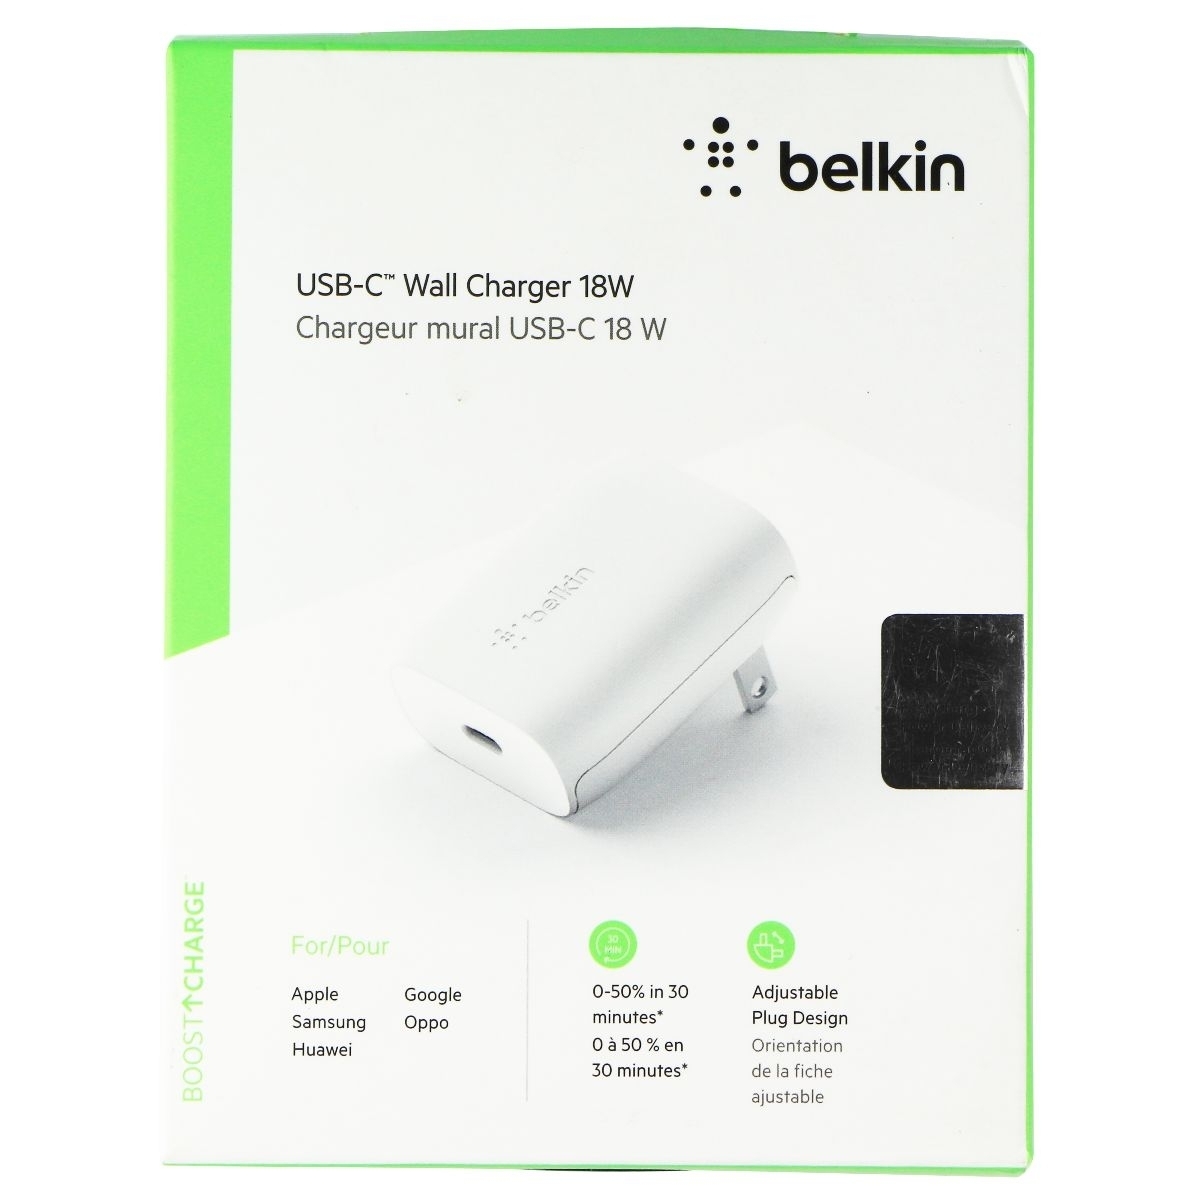 Belkin (18W) USB-C Wall Charger Travel Adapter - White (F7U096dqWHT) (Refurbished)